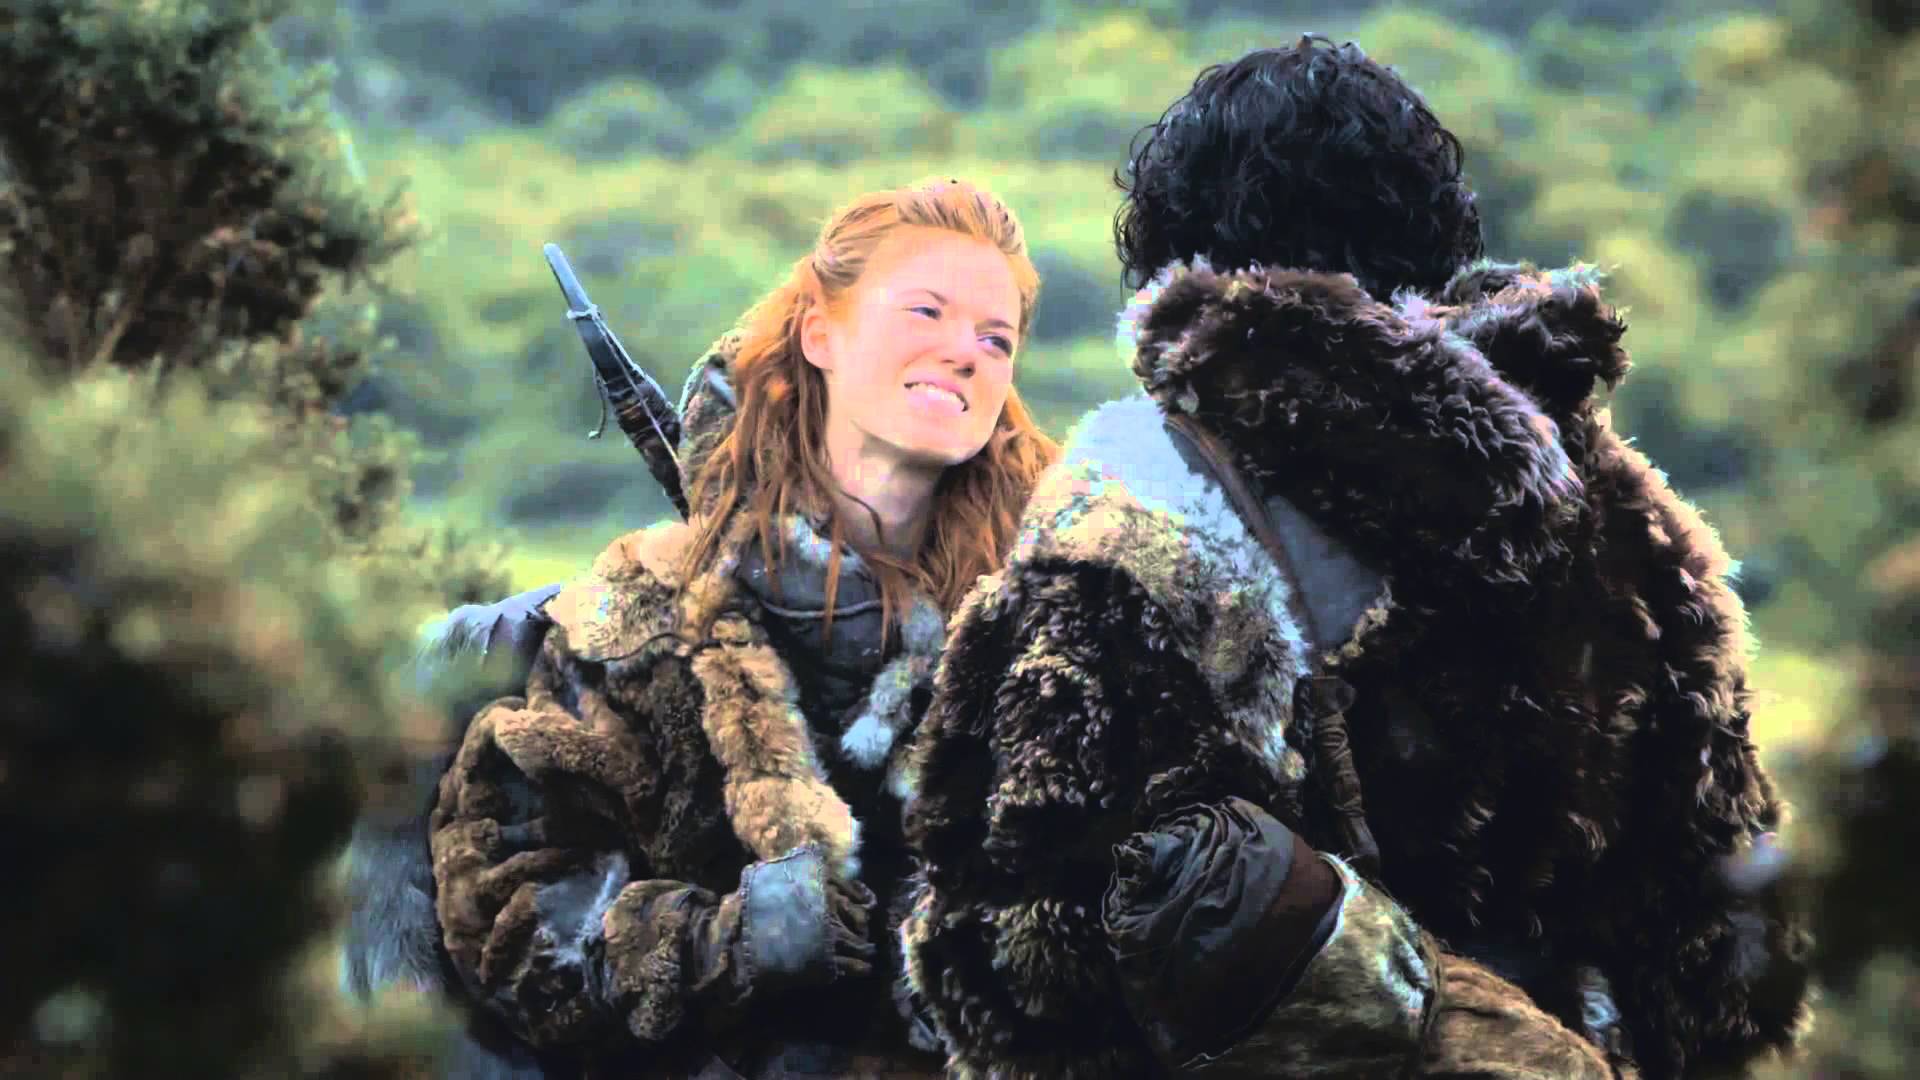 Jon Snow Ygritte Wallpaper And Game Of